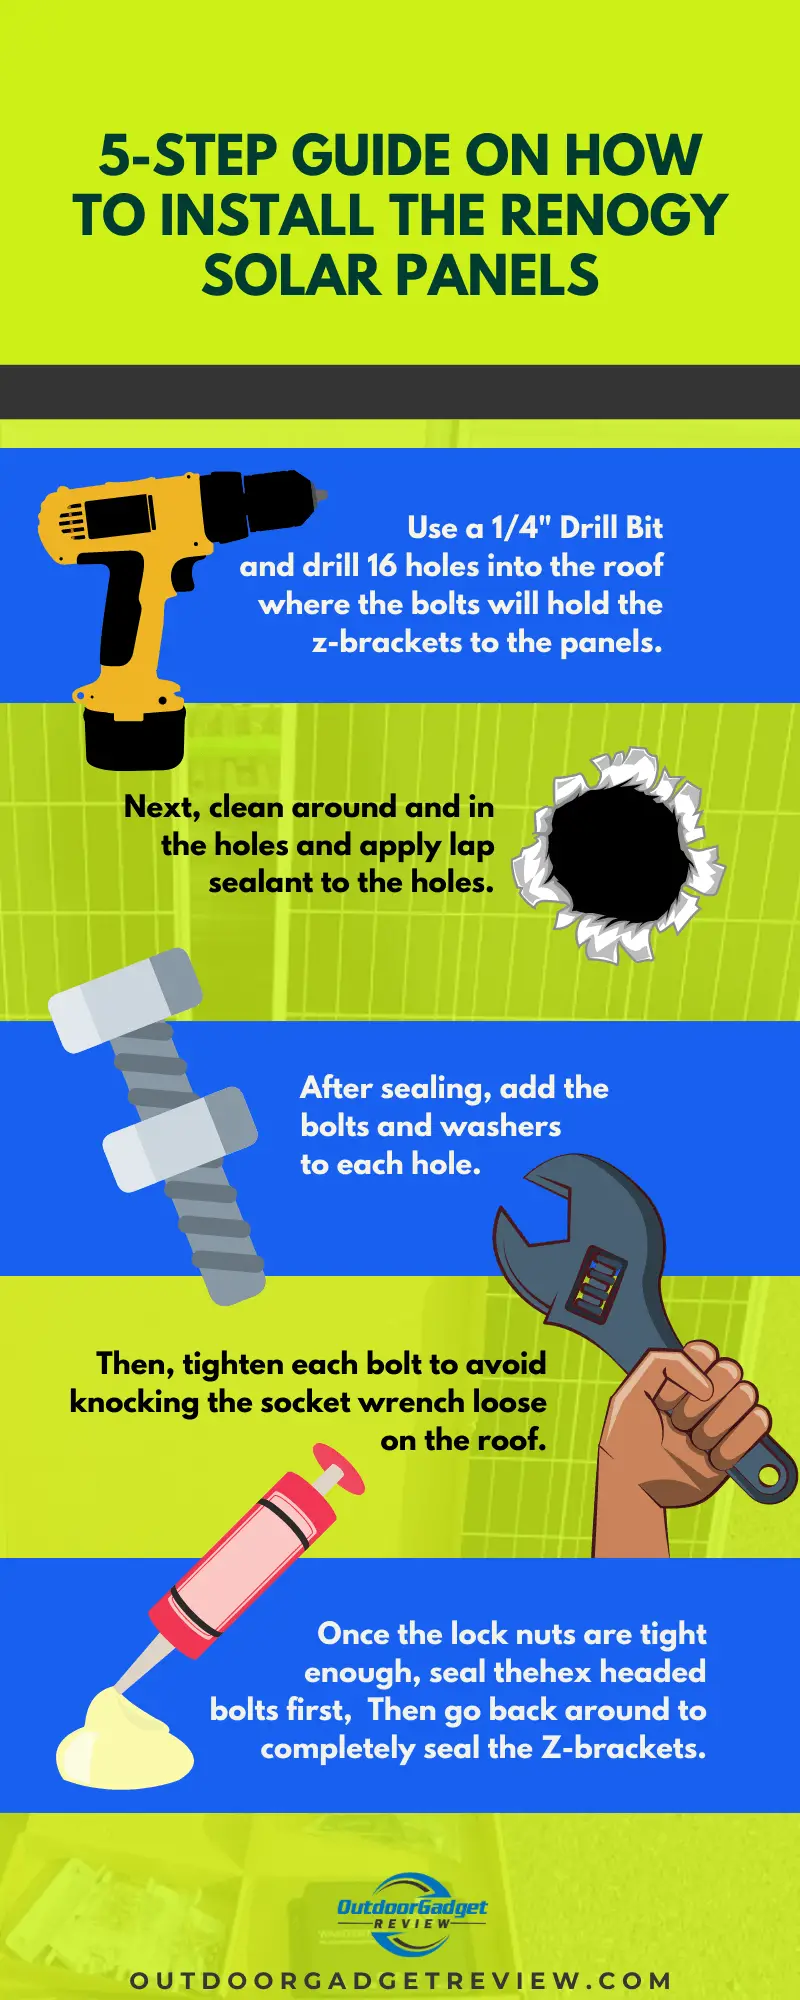 5-step guide on how to Set Up The Renogy Solar Panels